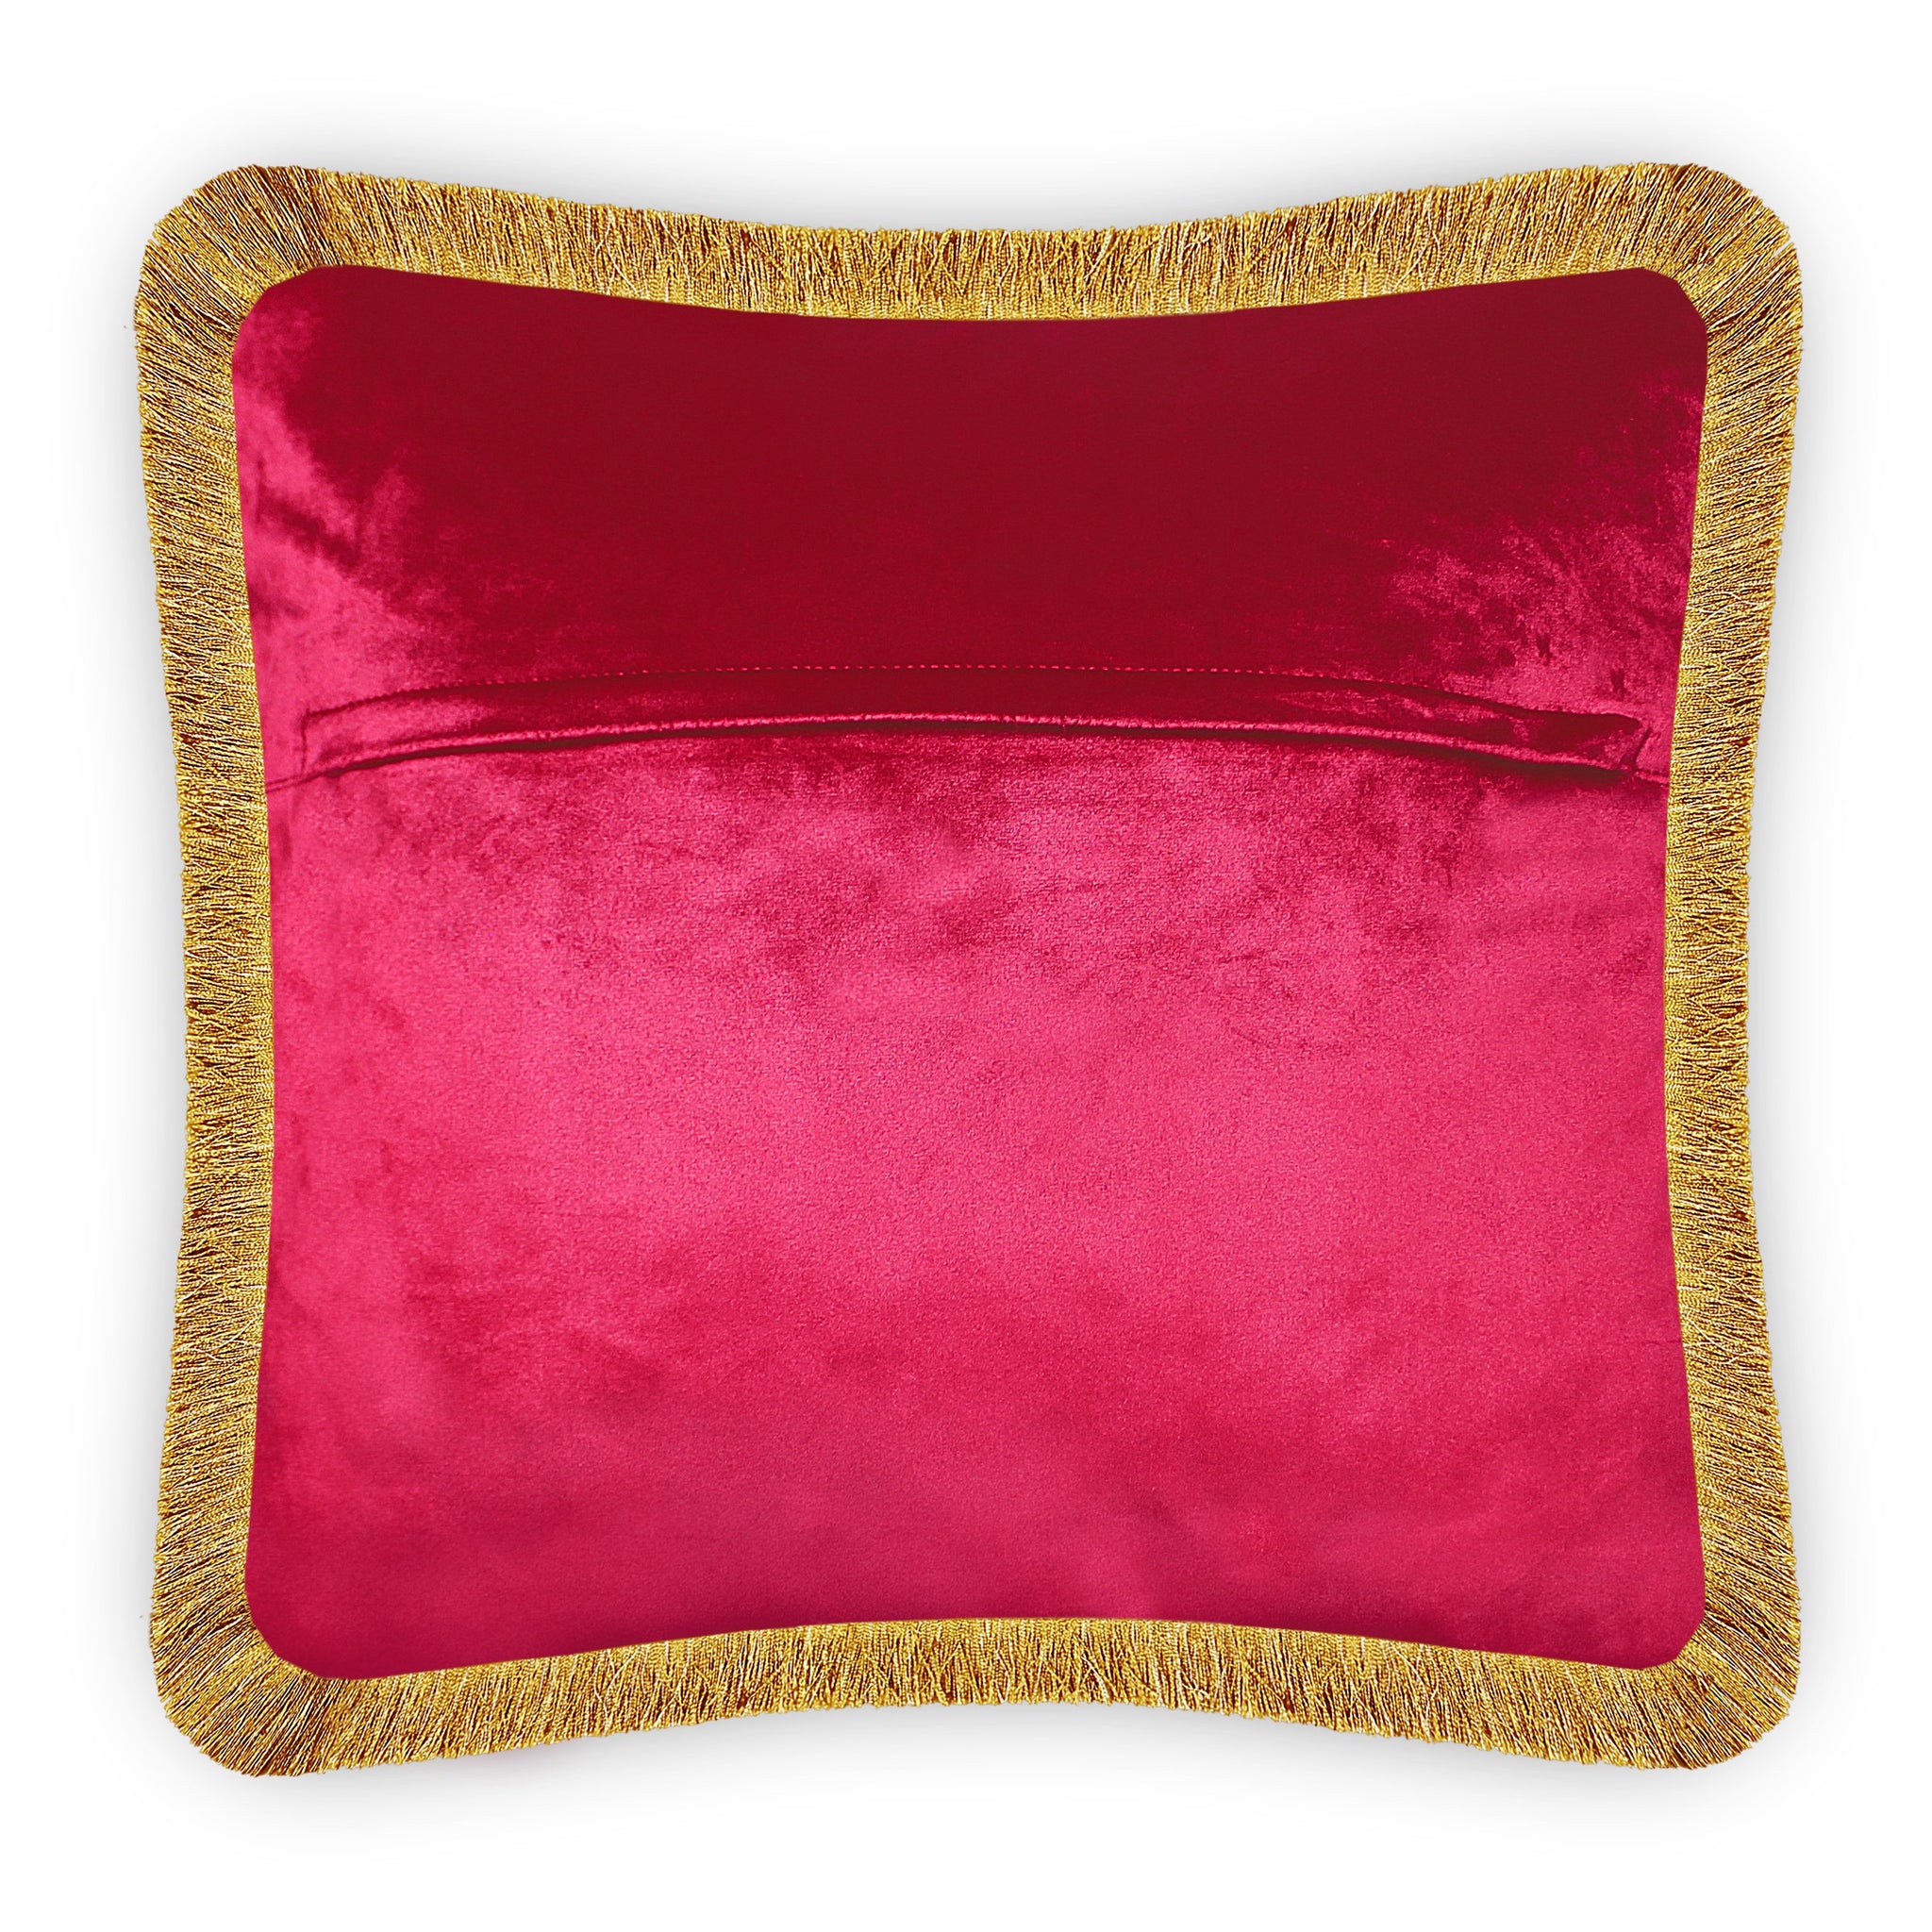  Cushion Cover Velvet Decorative Pillow Cover Classic Motif Embroidery Baroque Style  Red Throw Pillow for Sofa Chair Bedroom Living Room 45x45 cm (18x18 Inches)